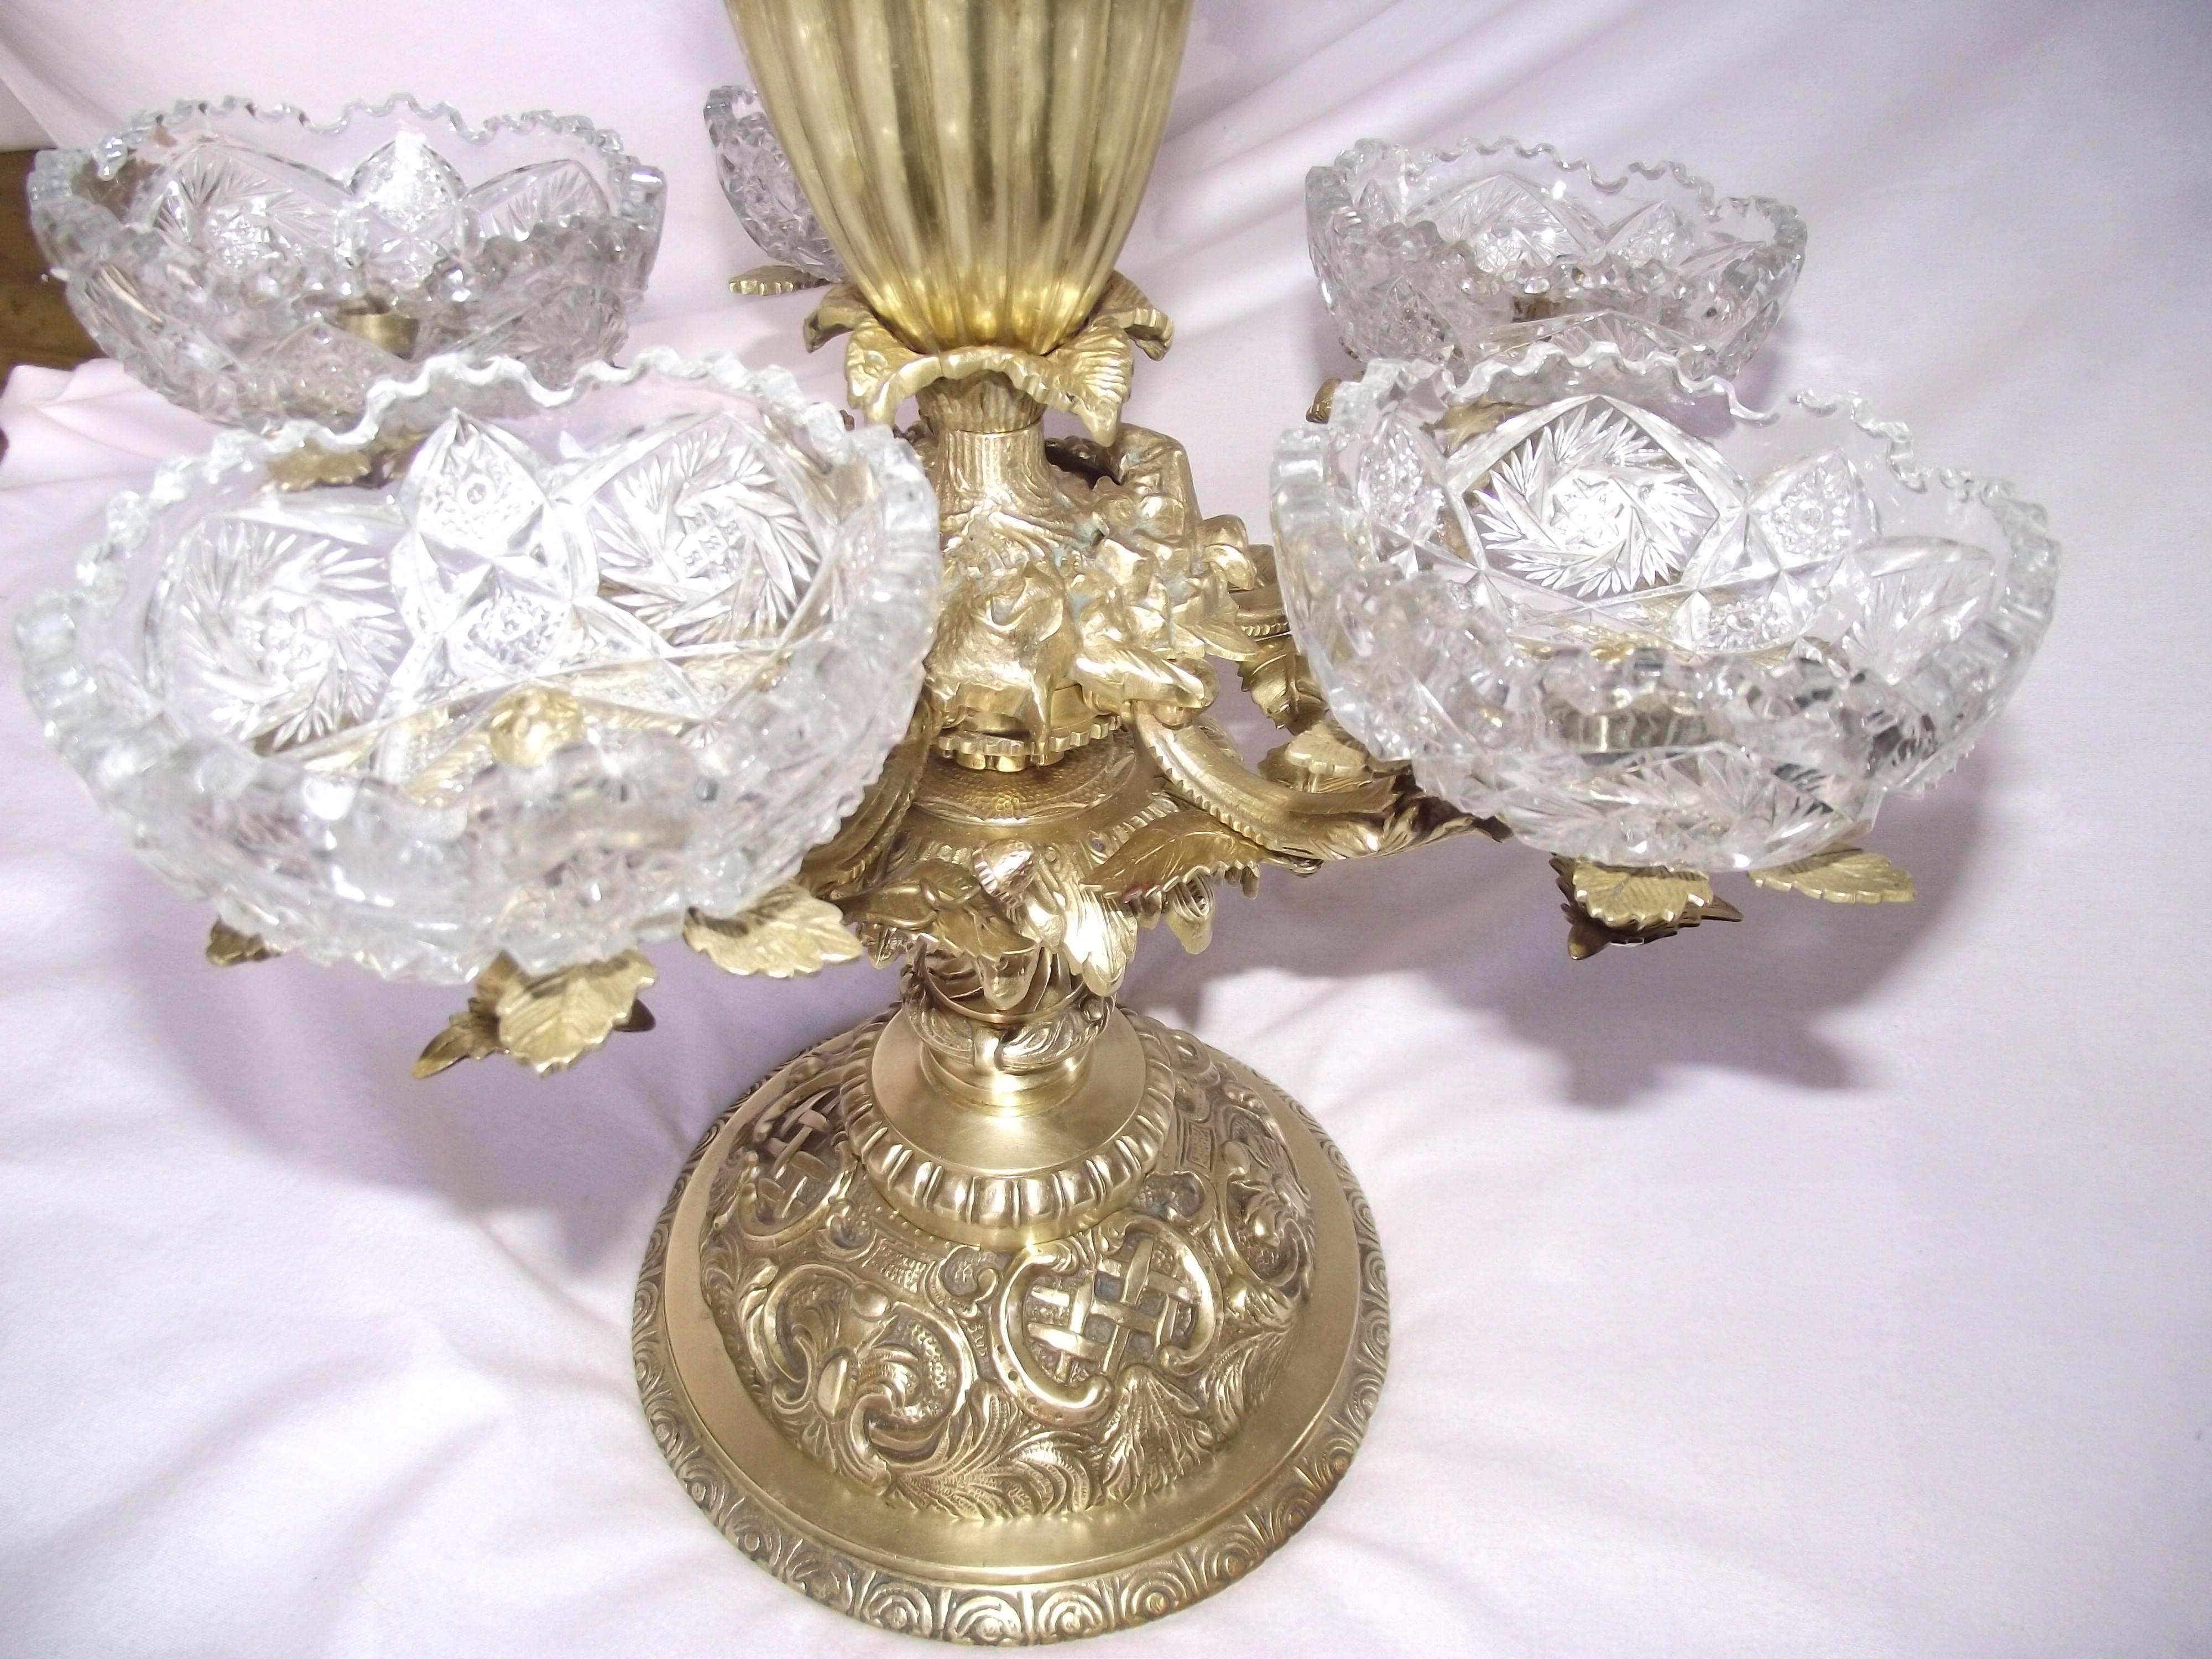 This elegant Victorian Eperne or centrepiece is made of very heavy solid brass. It has a thick large centre glass bowl which is surrounded by five matching saw tooth edged smaller bowls. This highly decorated piece is freshly polished and lacquered